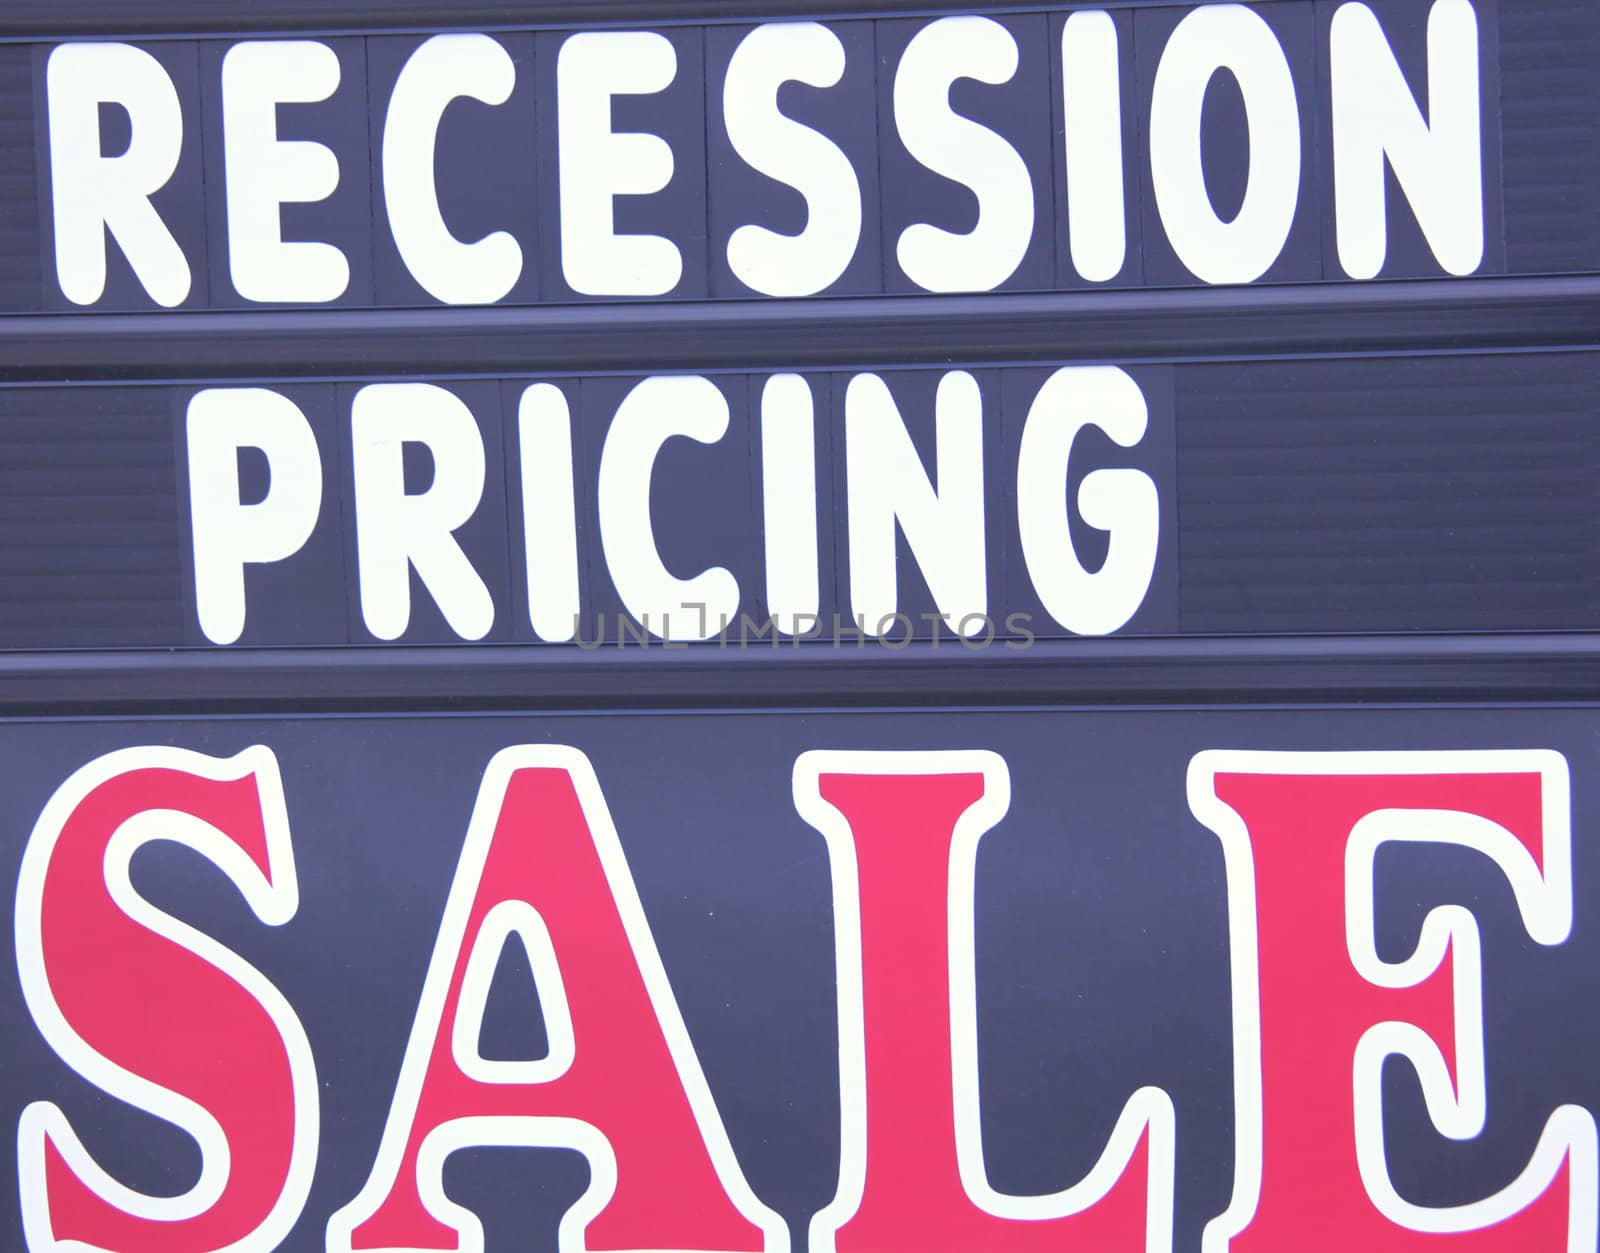 Recession pricing sale sign. by oscarcwilliams